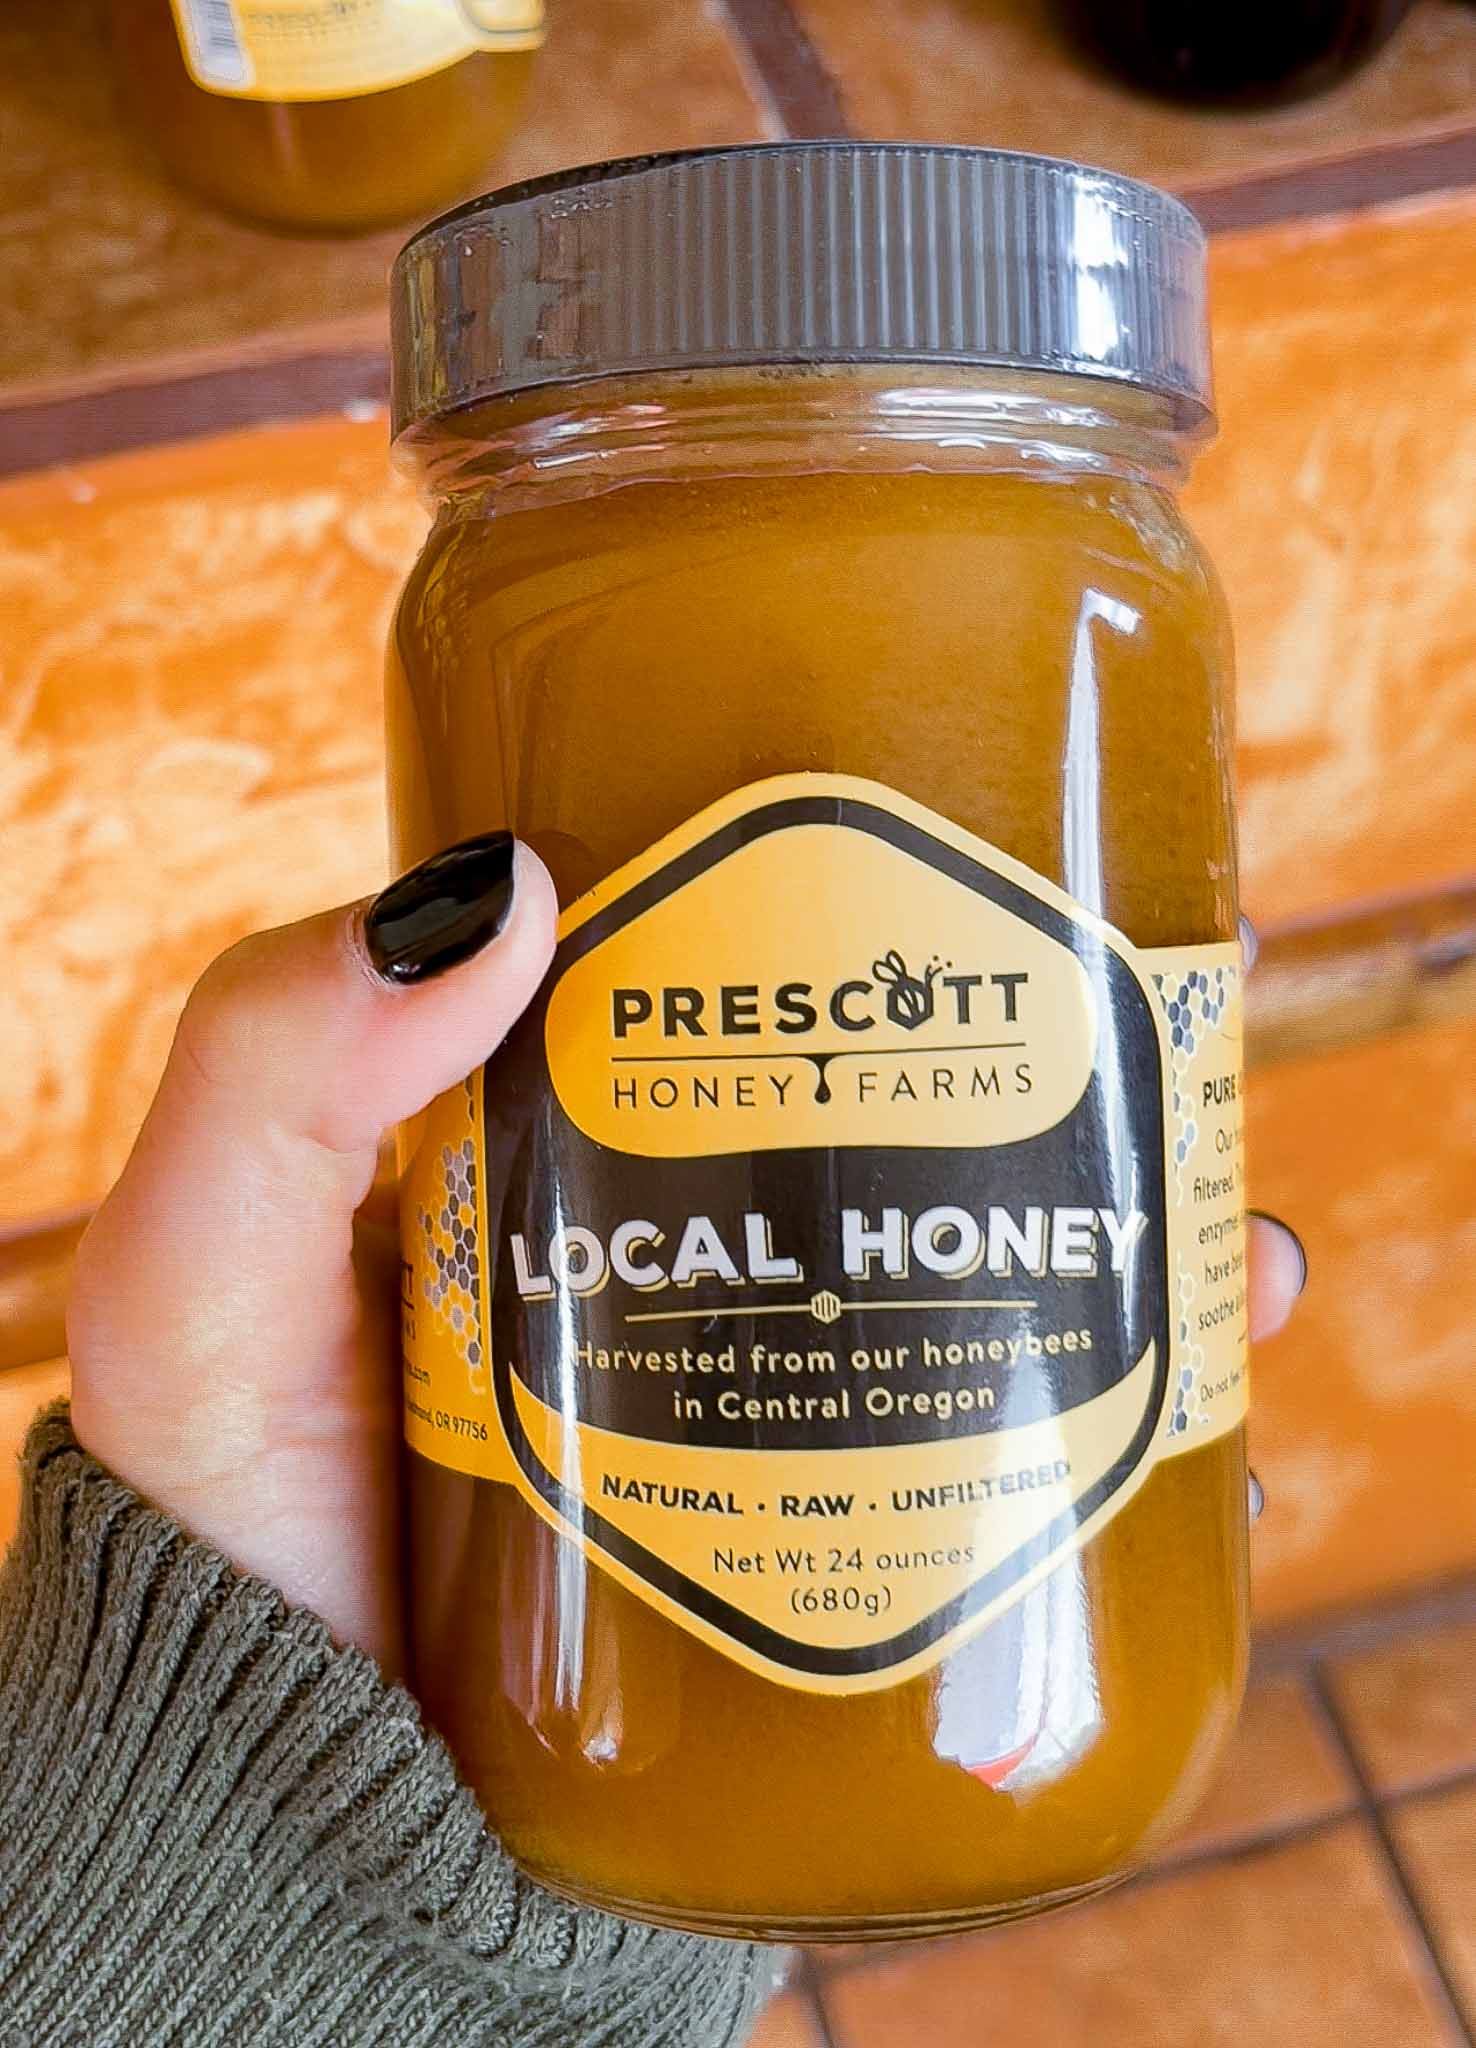 jar of honey reads "local honey from central oregon" from prescott honey farms in remdond, oregon